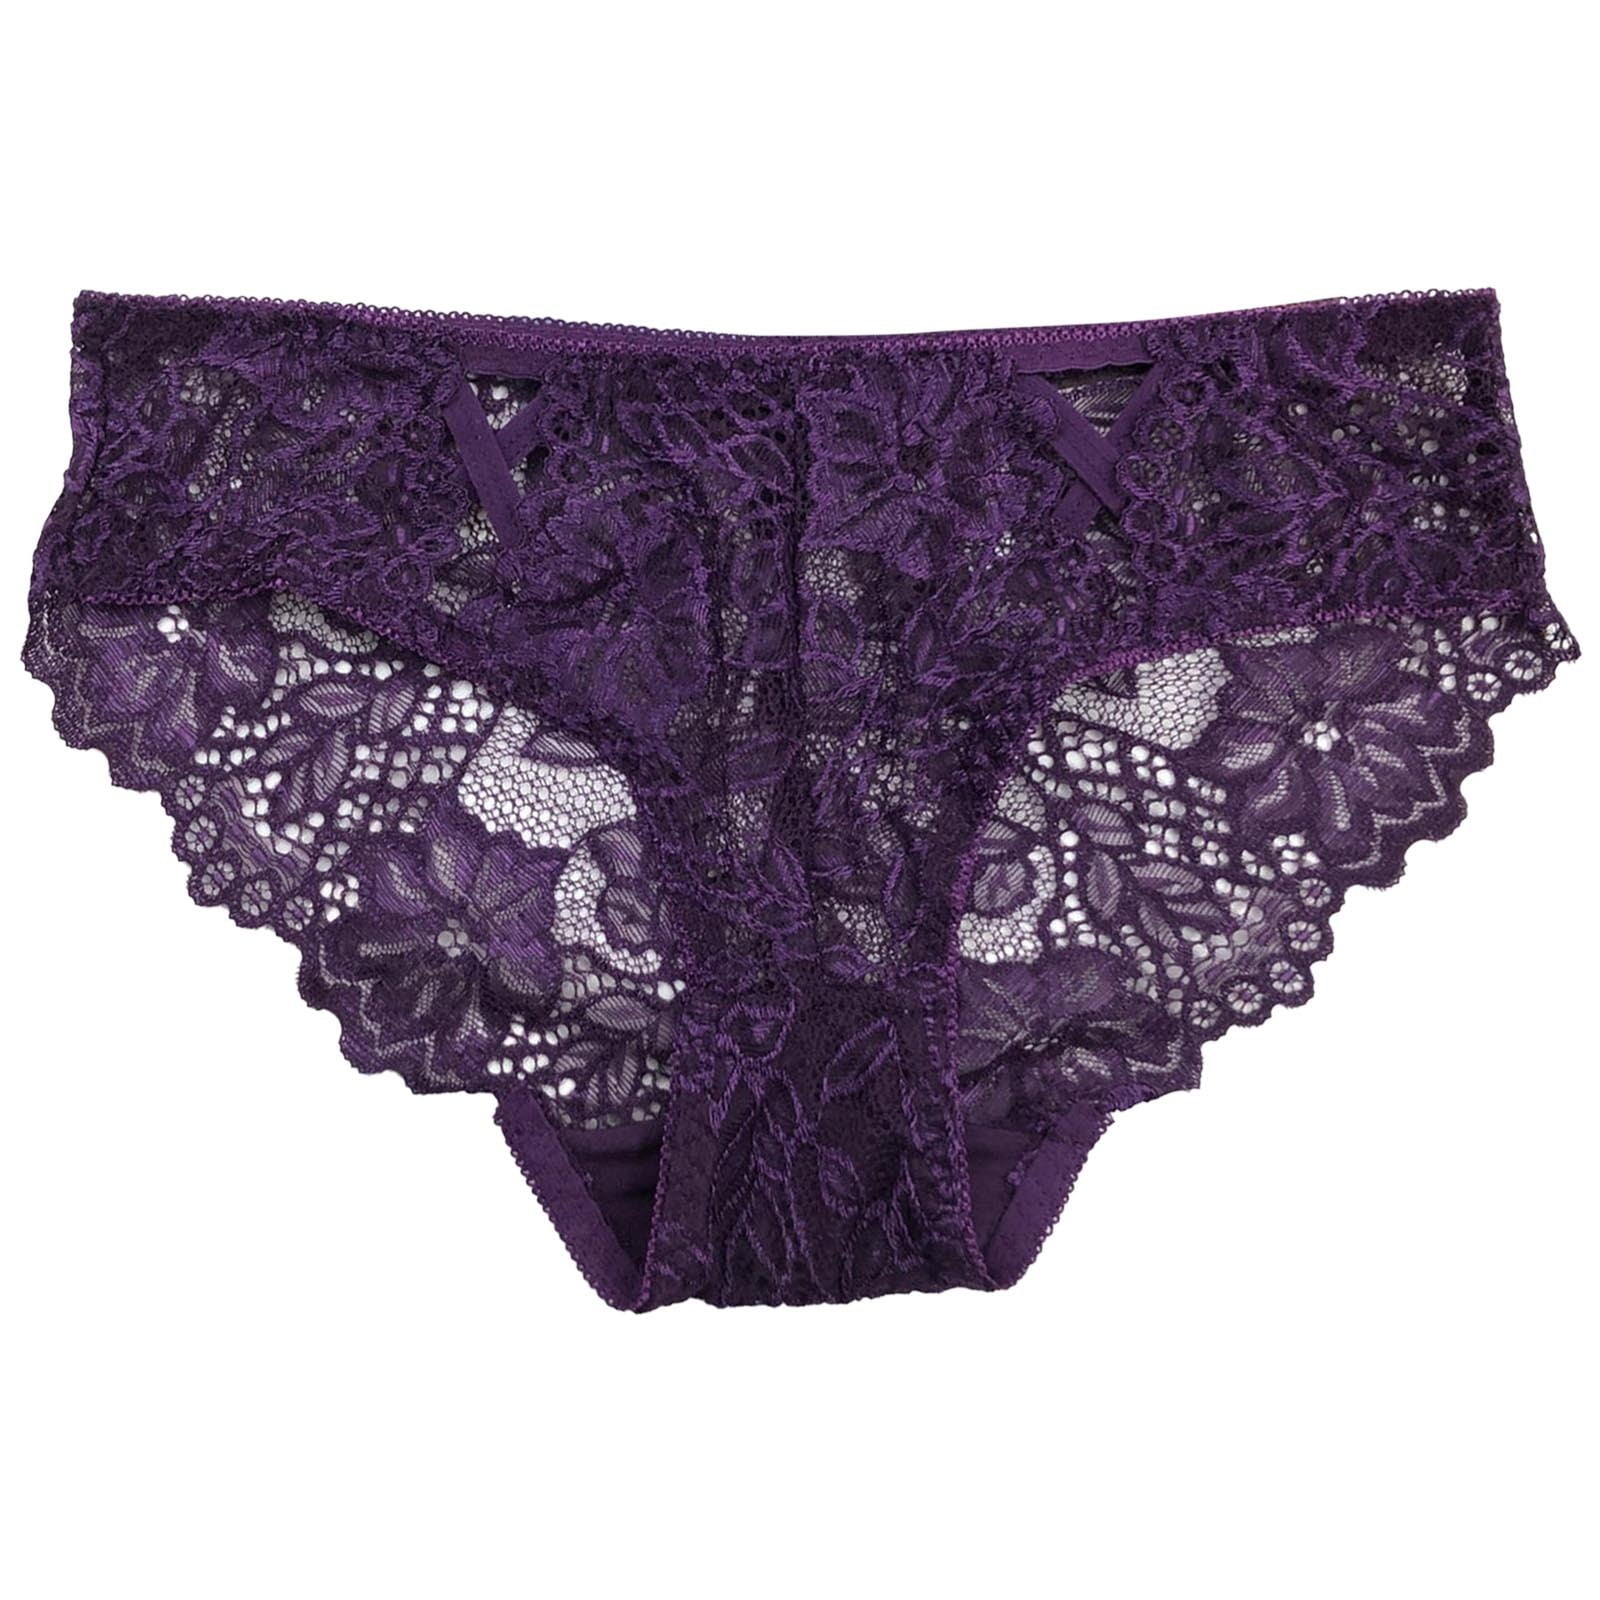 Buy The Secret Boutique Women Sexy Briefs Underwear Nice Elastic Knickers  Panties Free Size Purple at